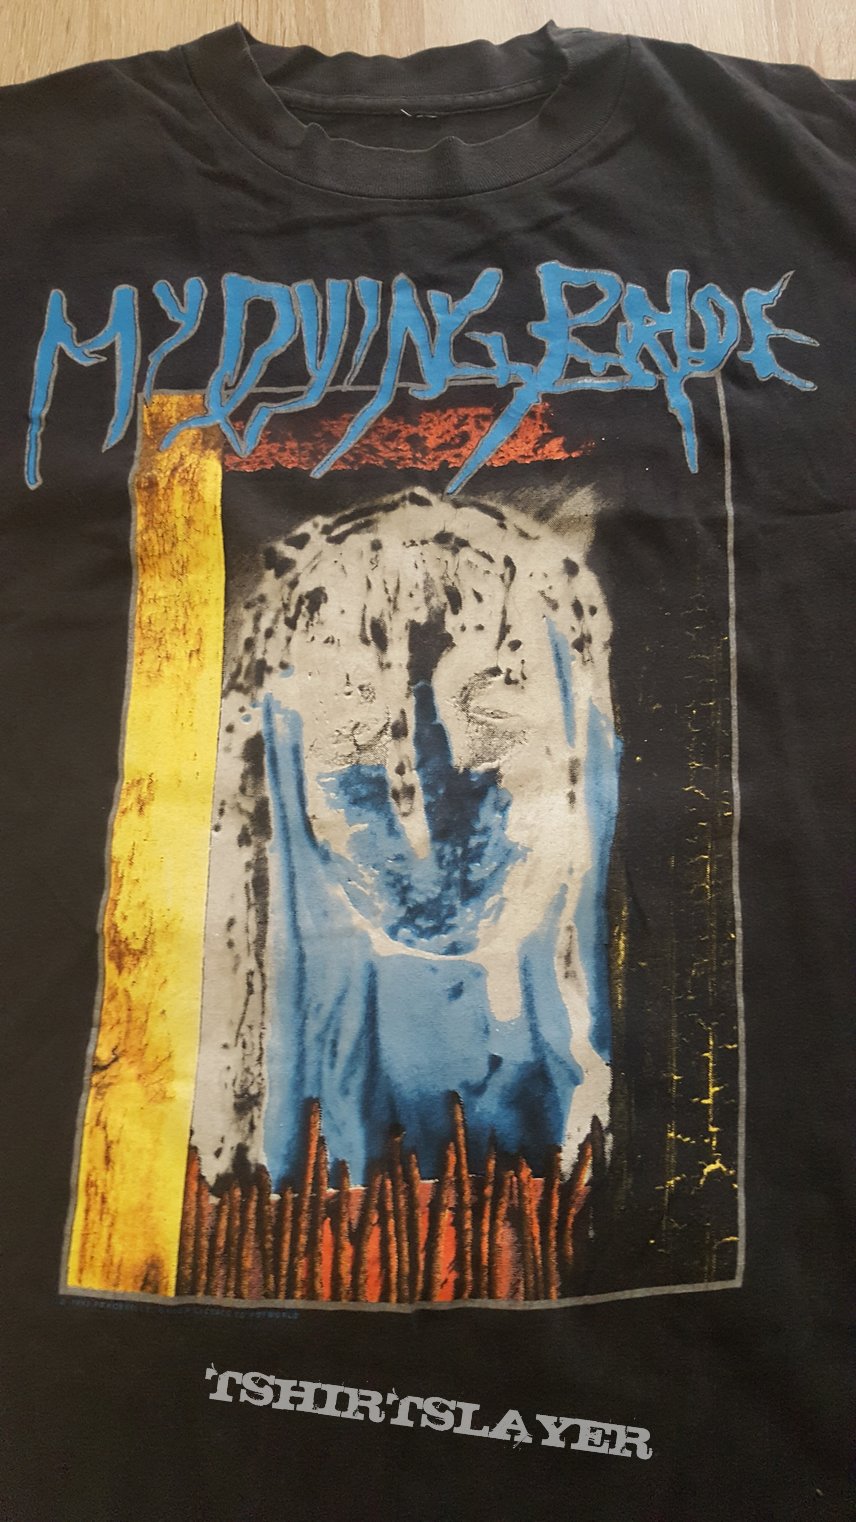 My Dying Bride - Turn Loose The Swans XL Shirt